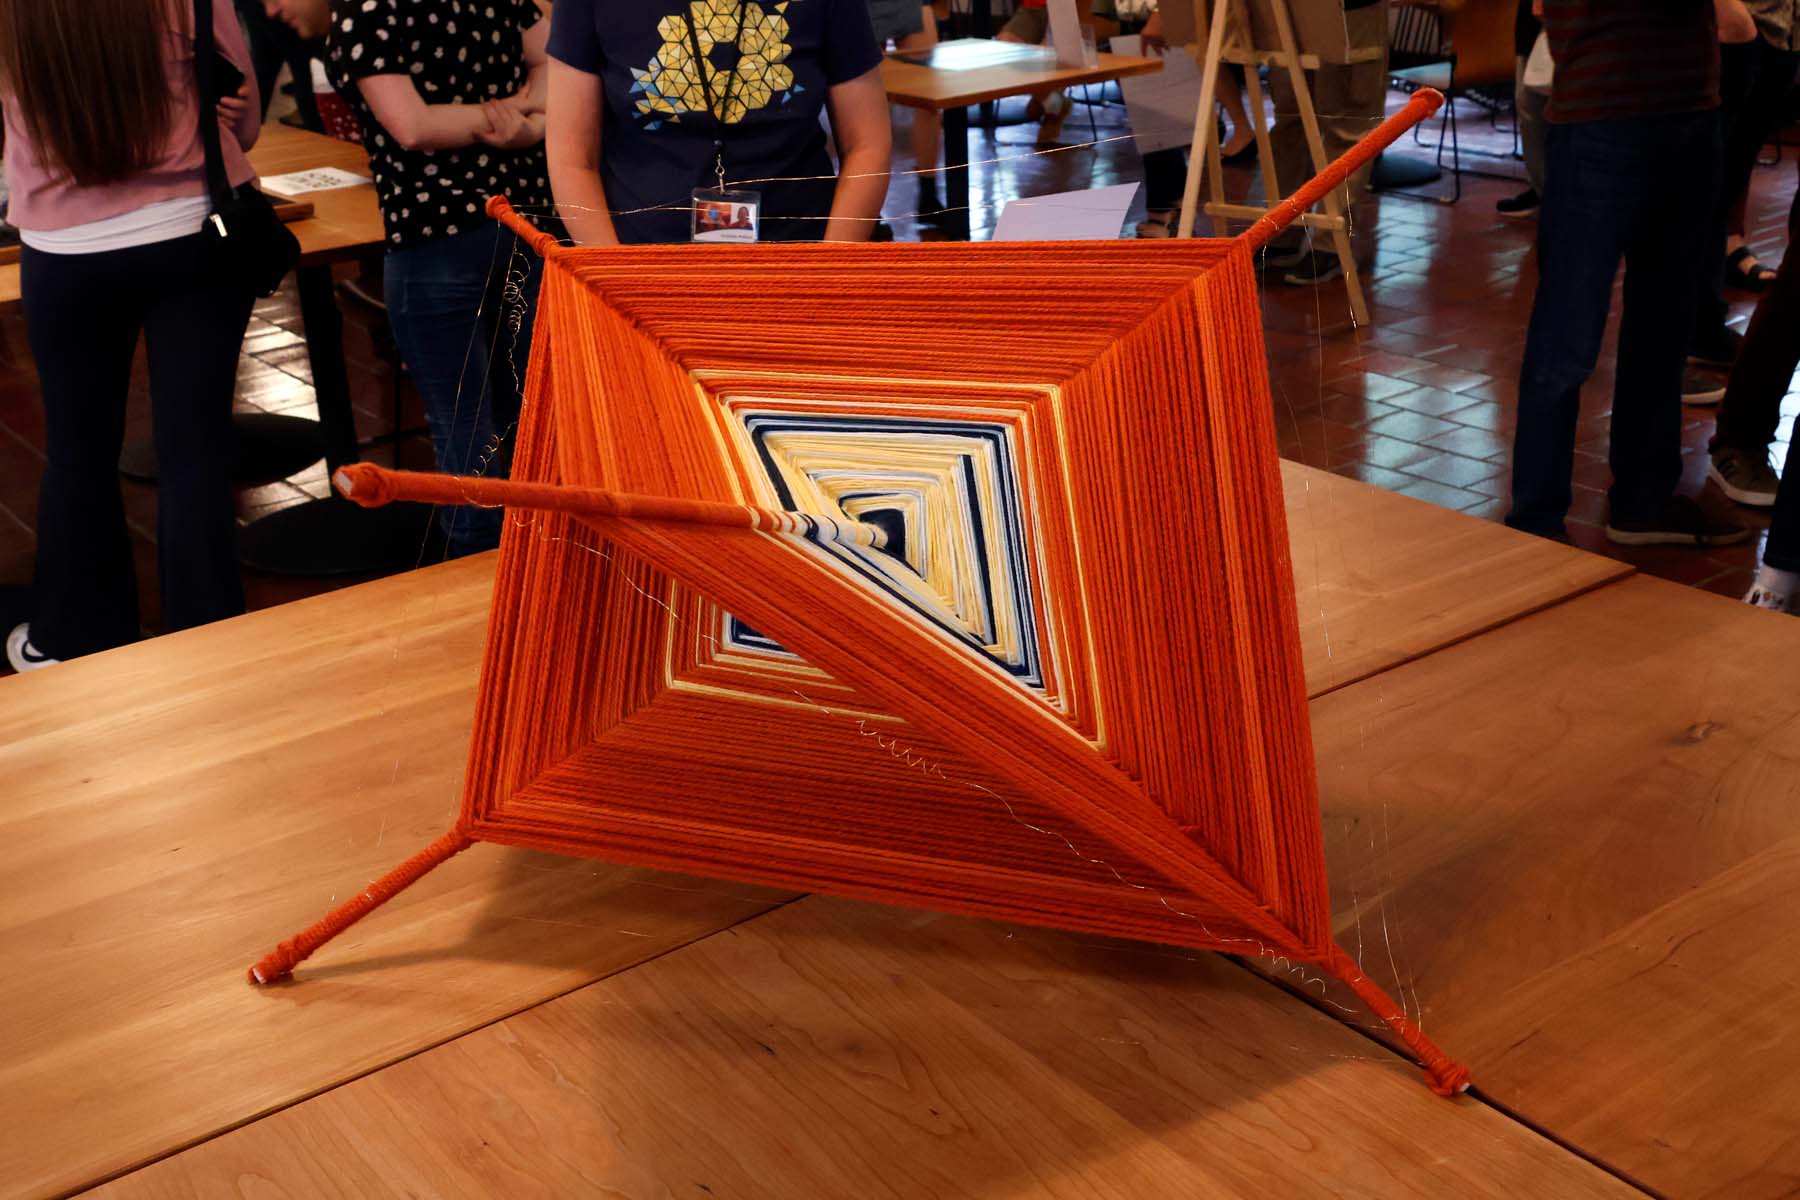 A yarn sculpture: Two wooden pieces form a cross and yellow and orange yarn is wrapped along back and forth forming a 3-dimensional diamond